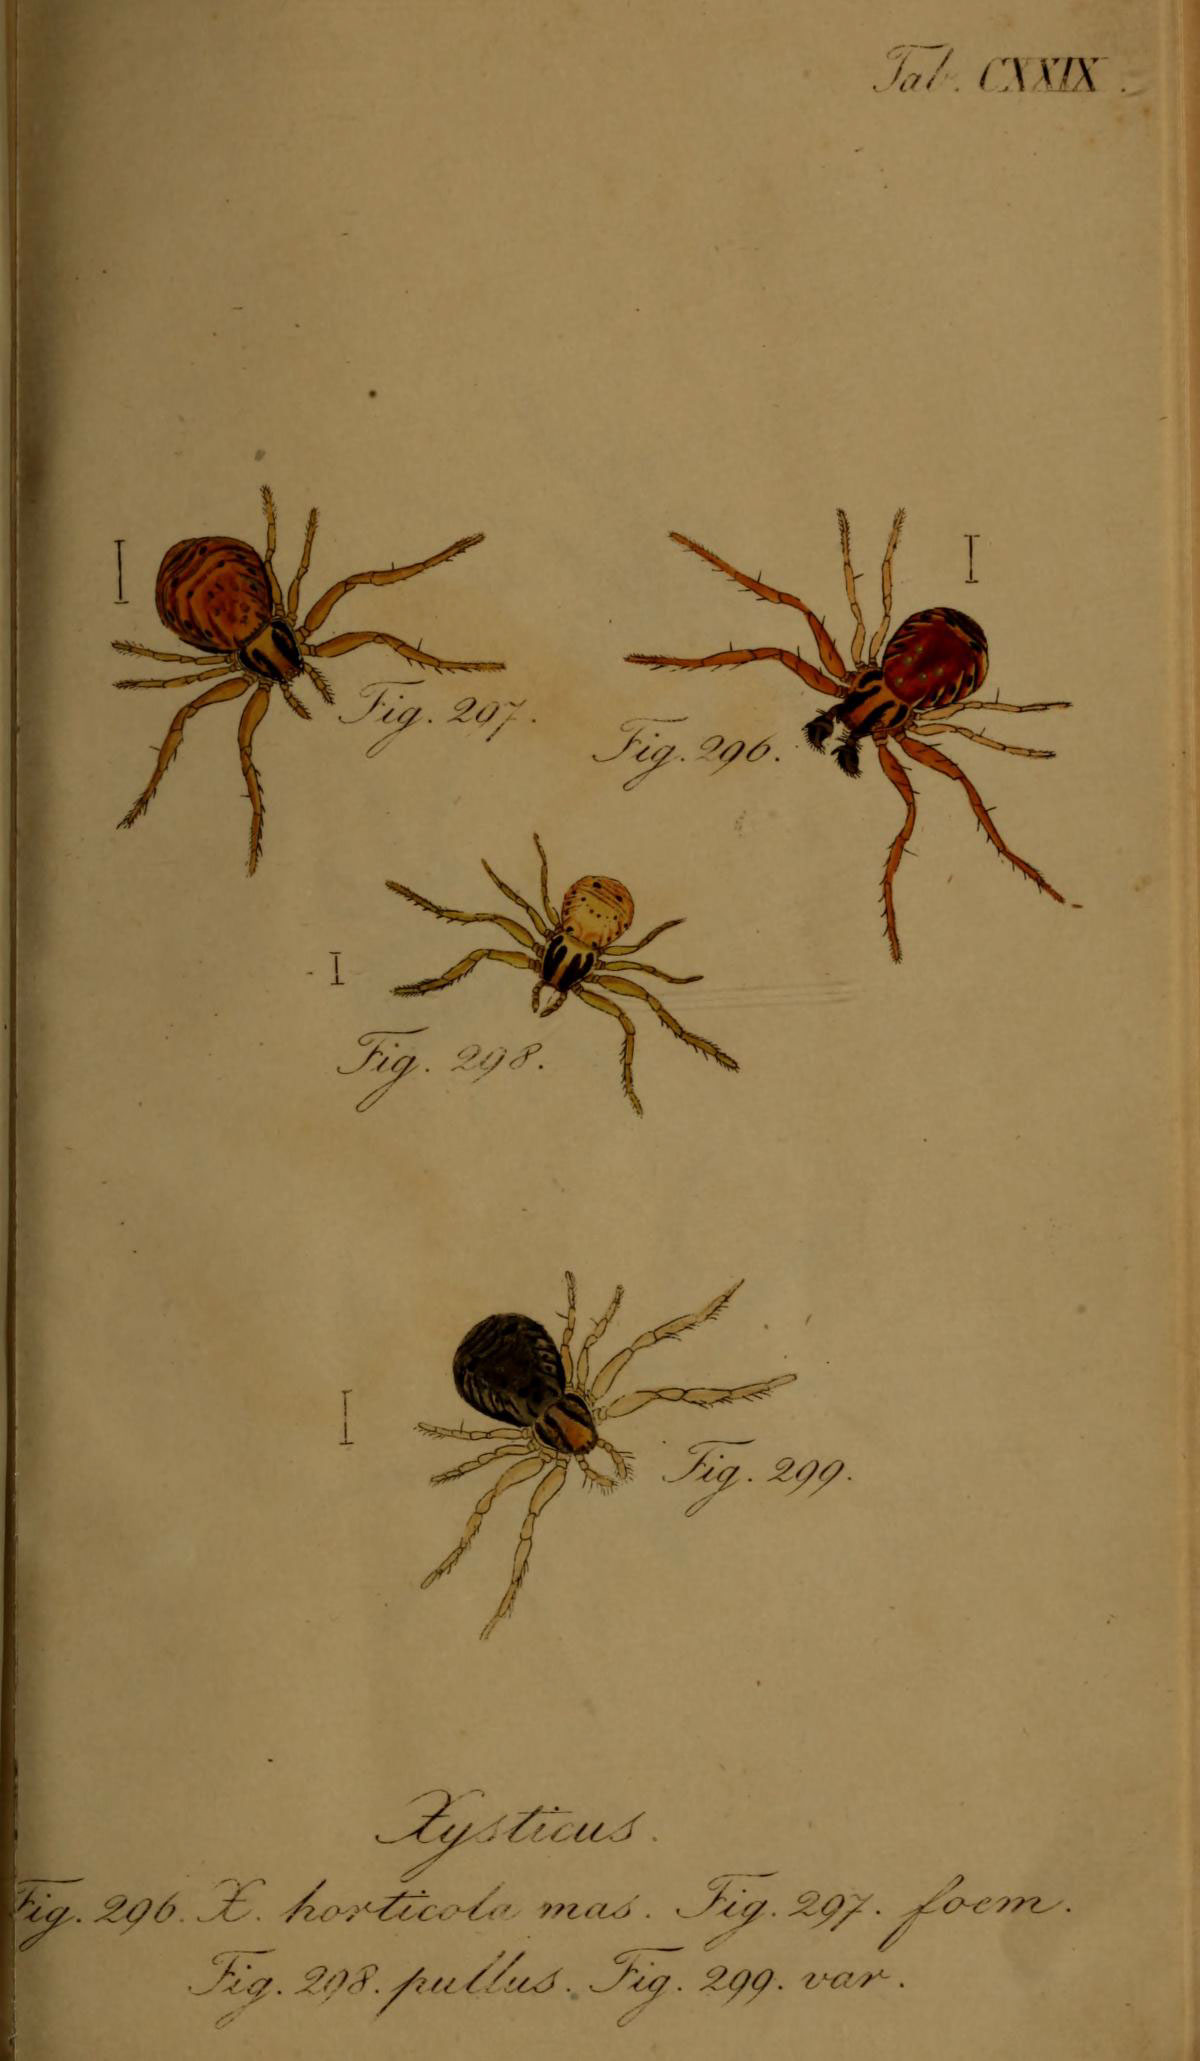 a book with spider images in it